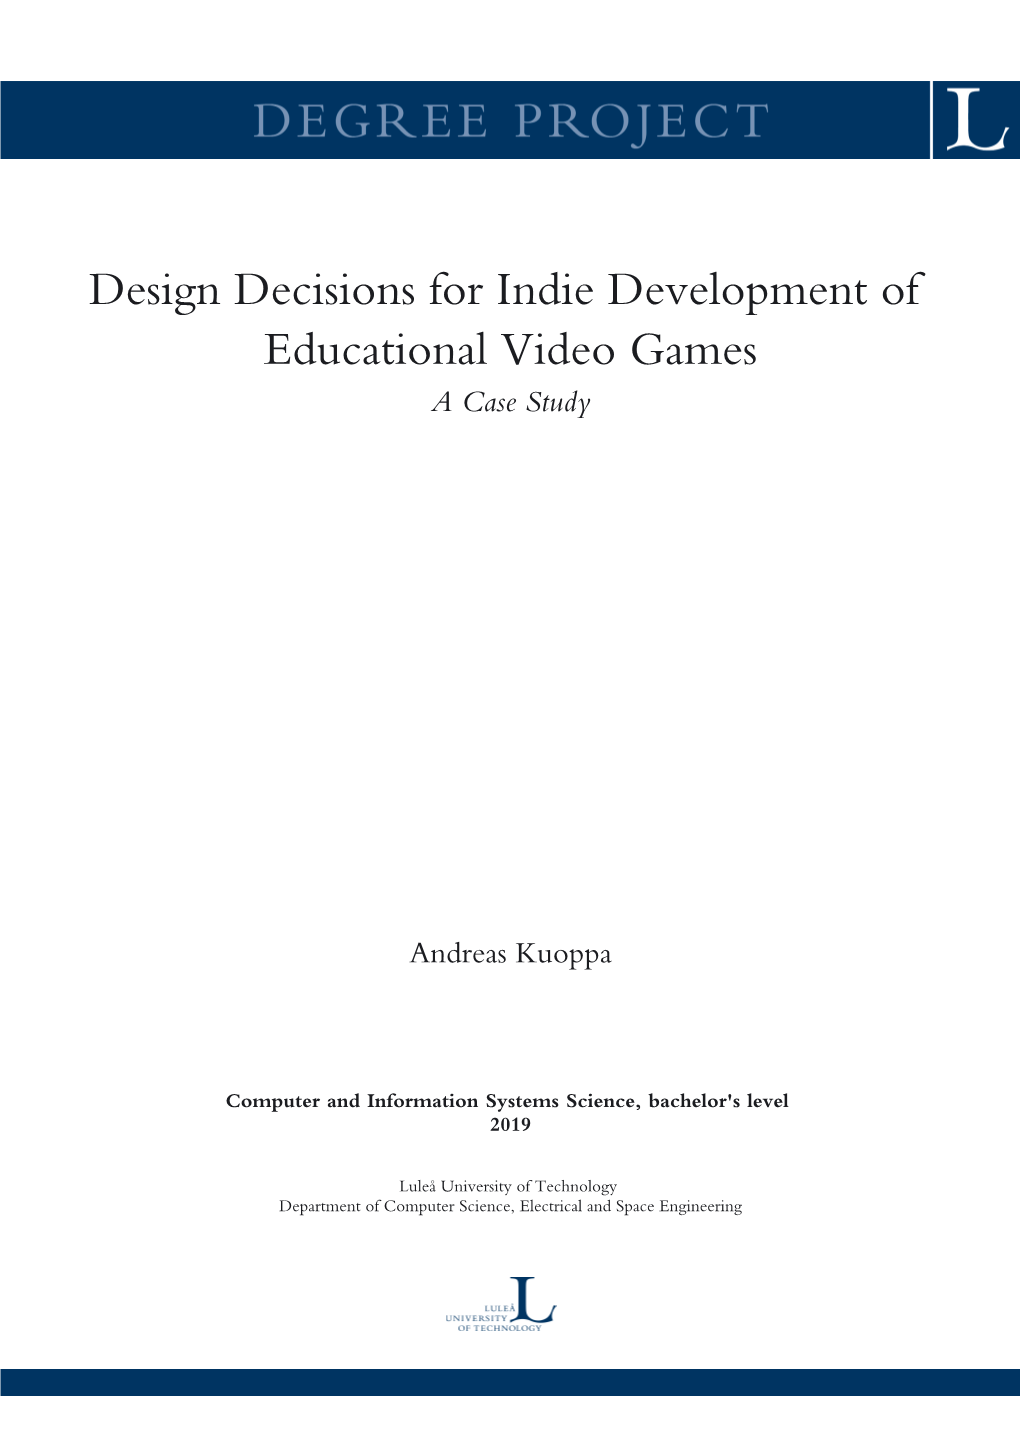 Design Decisions for Indie Development of Educational Video Games a Case Study